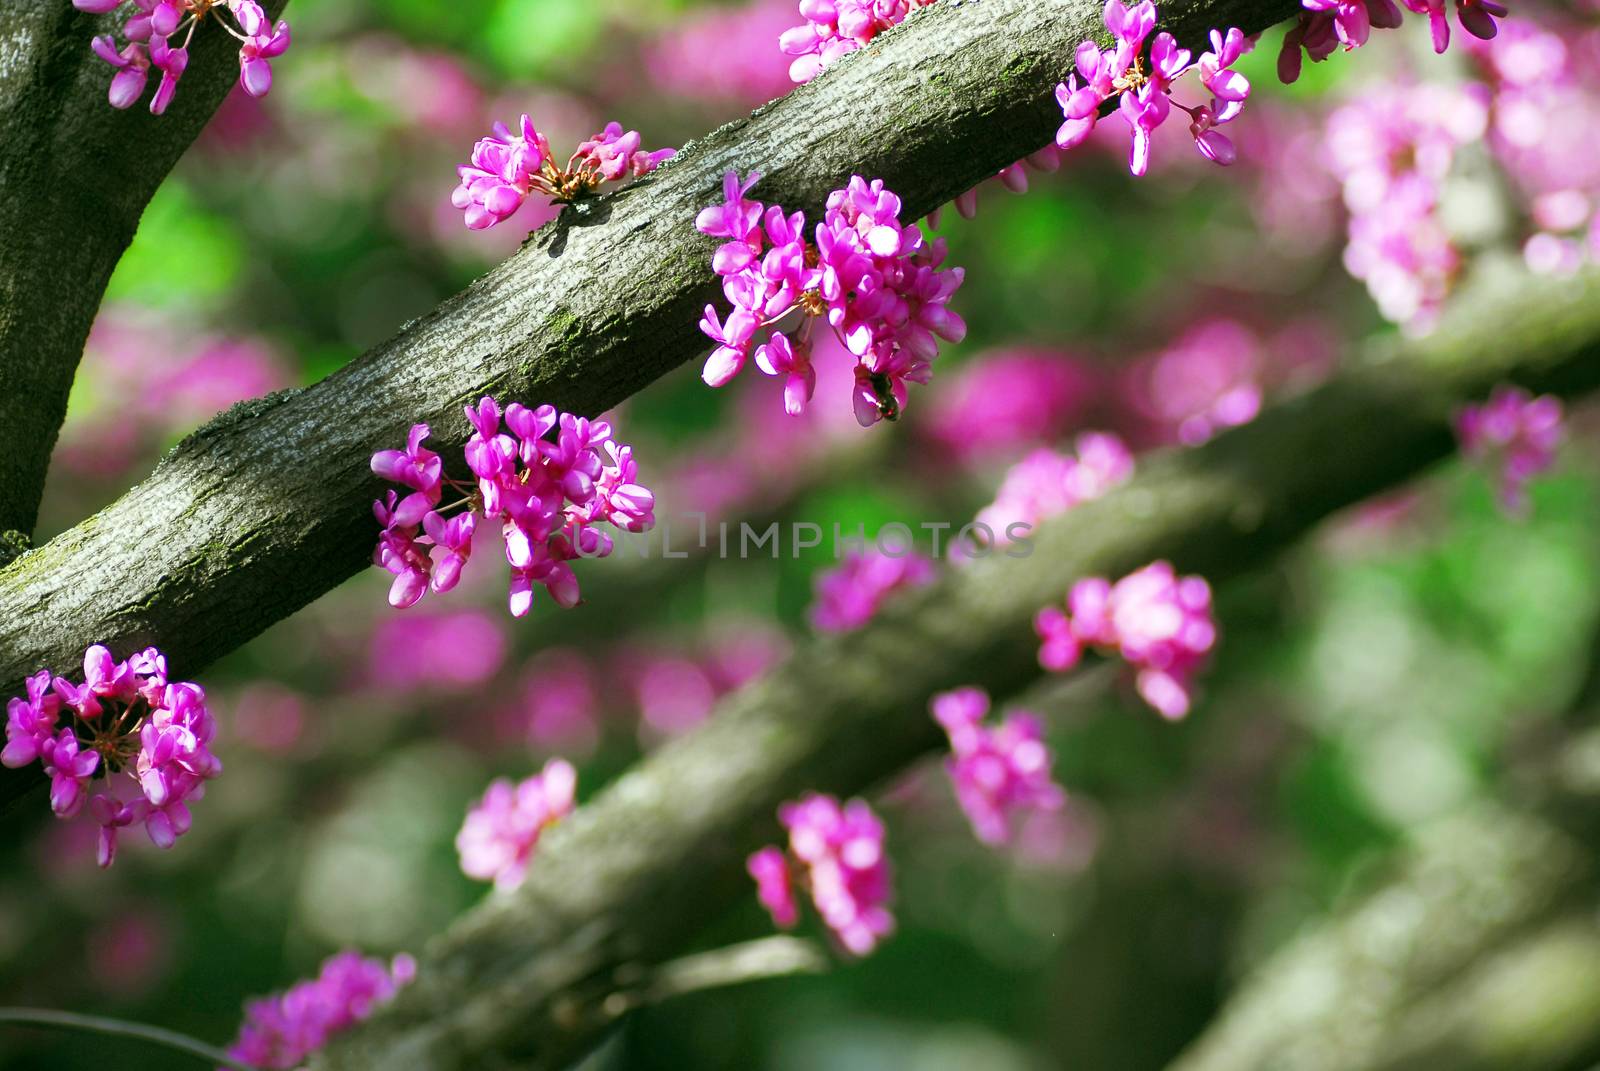 Cercis canadensis (eastern redbud) tree at spring with pink flowers